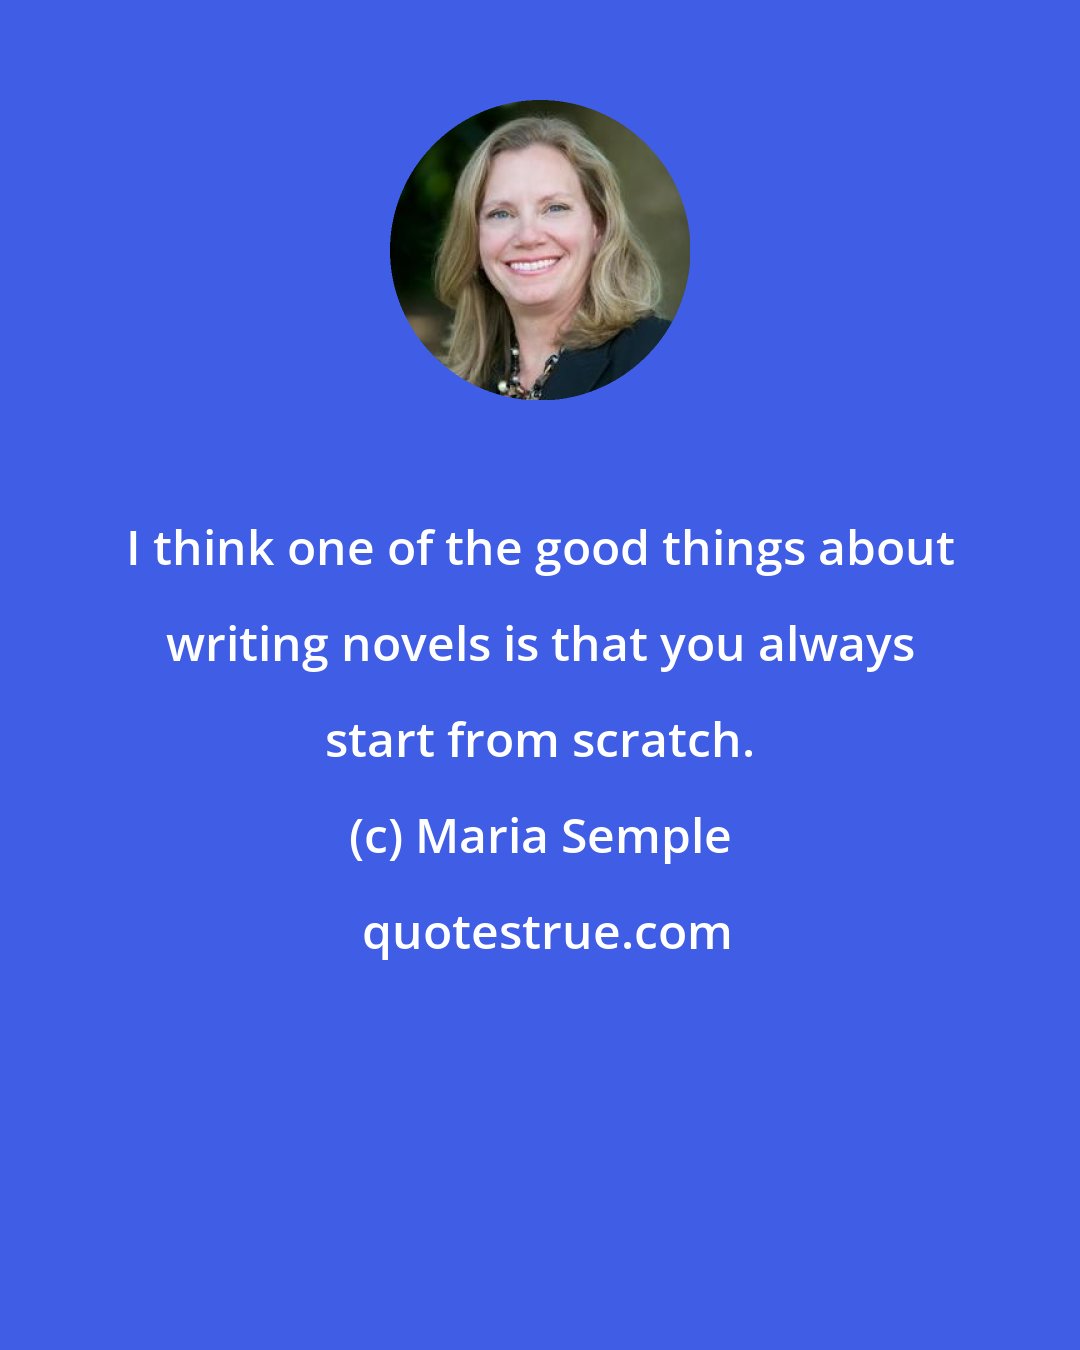 Maria Semple: I think one of the good things about writing novels is that you always start from scratch.